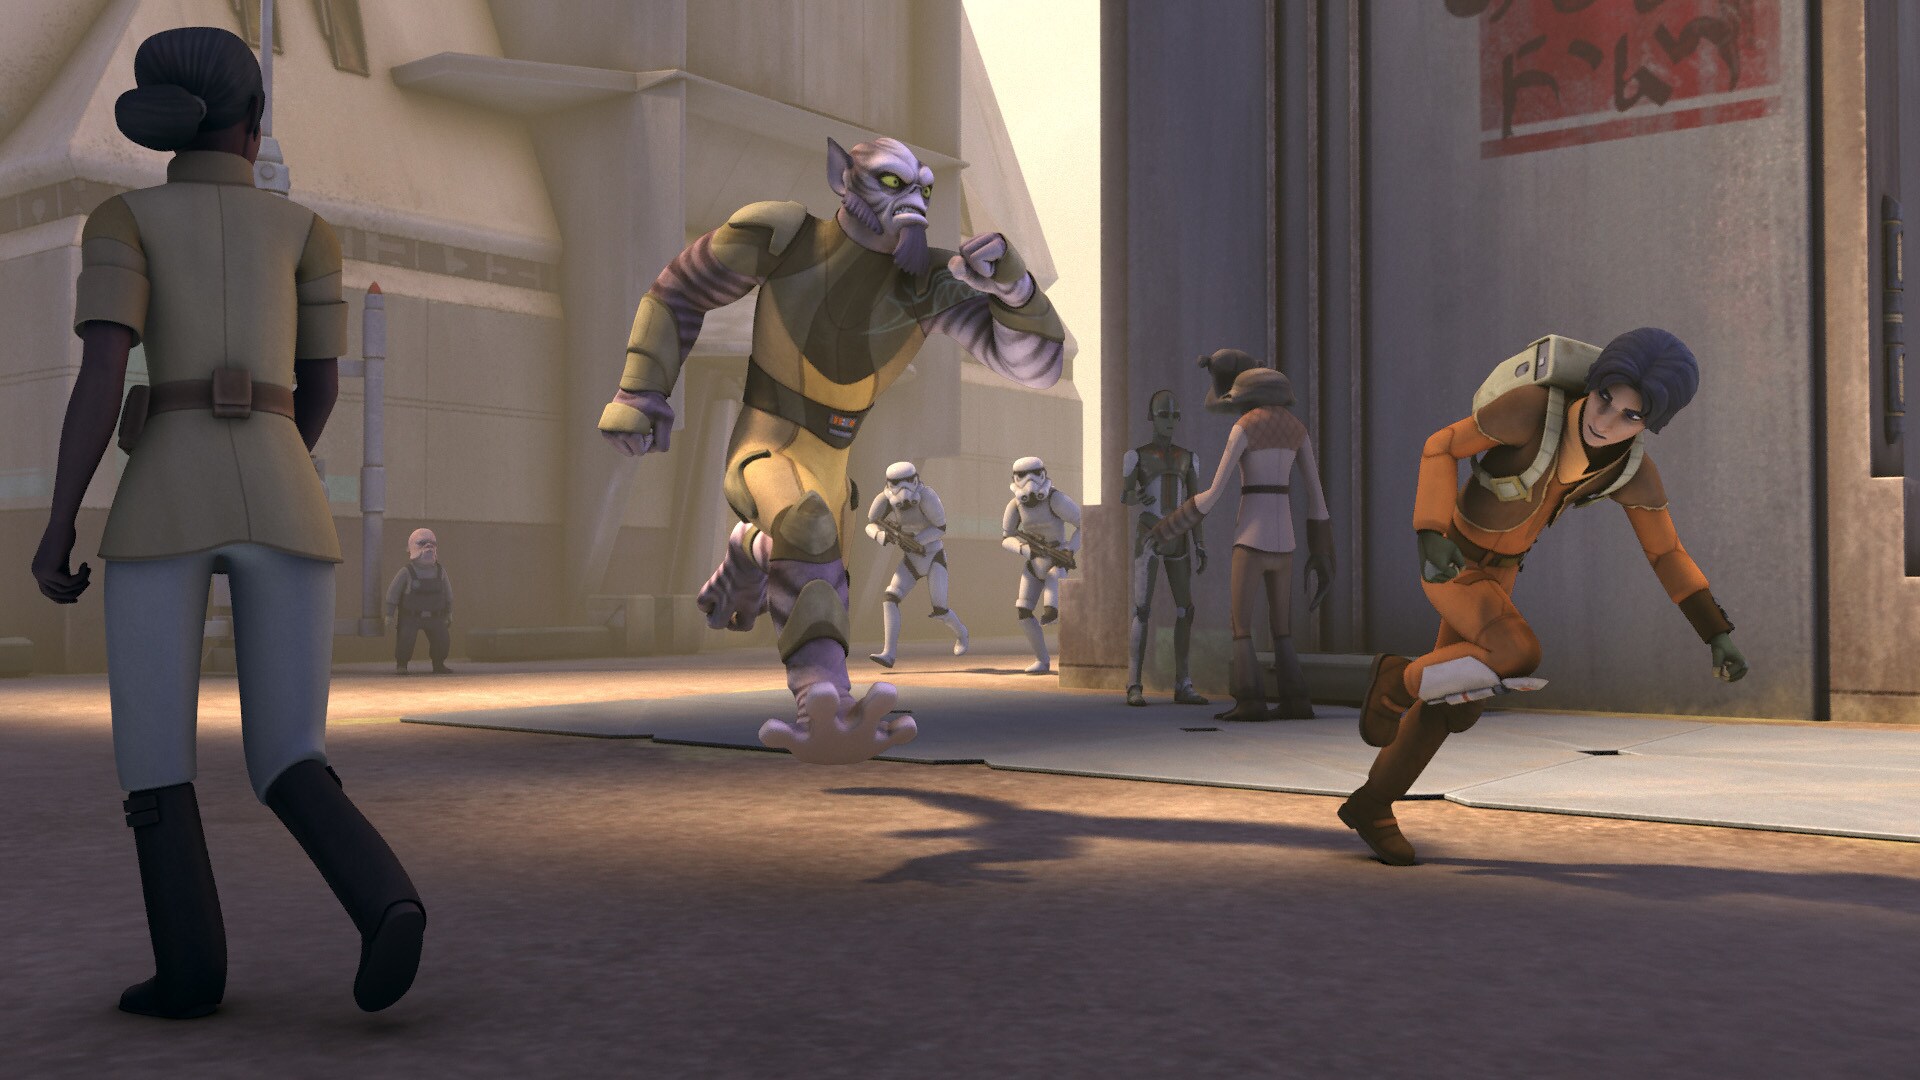 Zeb and Ezra take off through the Kothar streets, stormtroopers giving chase. Using his natural c...